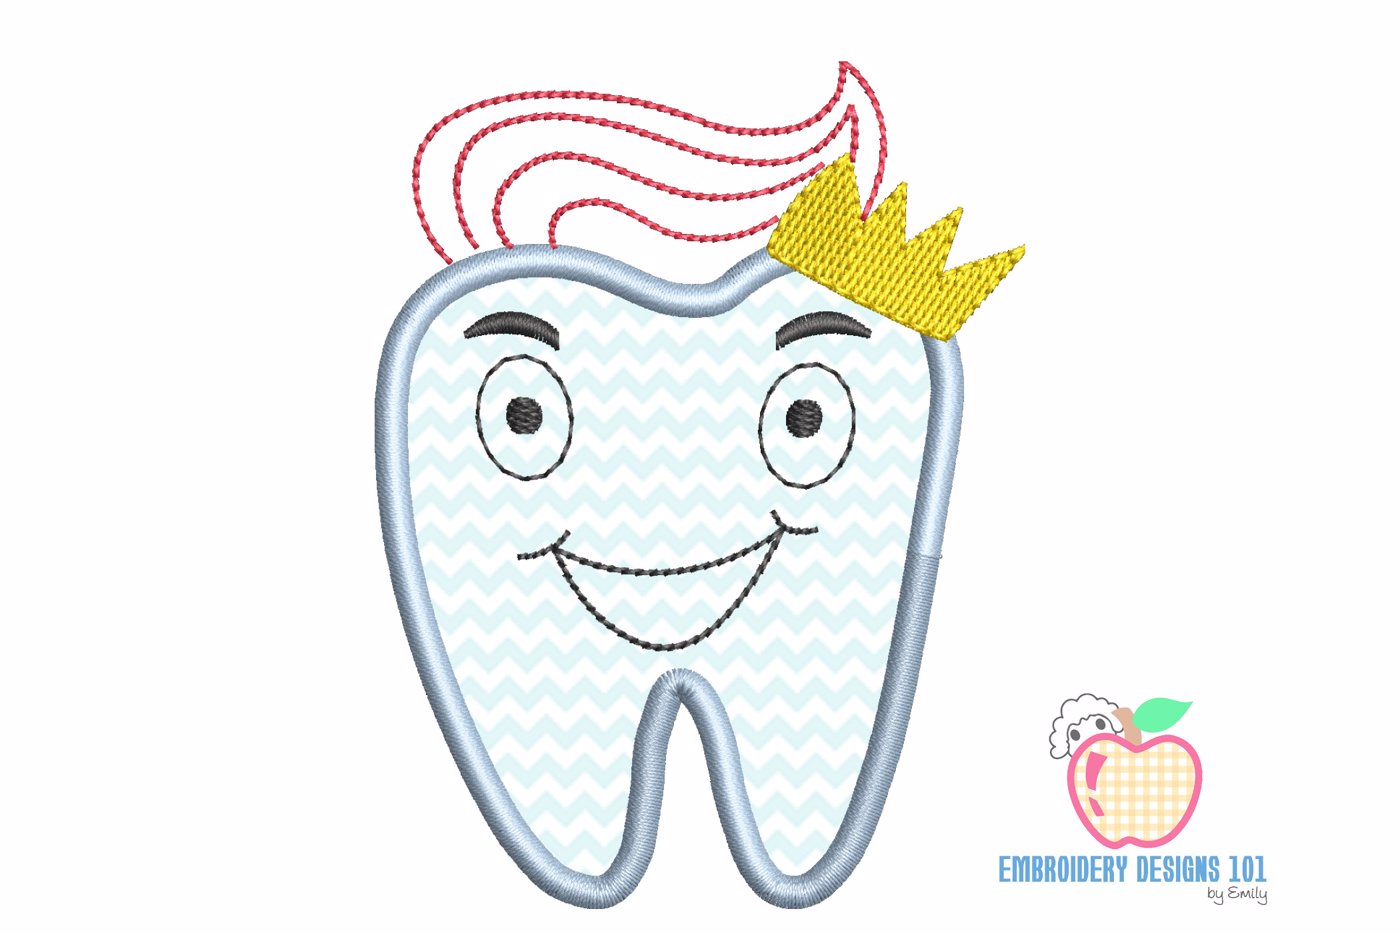 Tooth As The Cartoon With A Smile Applique Pattern